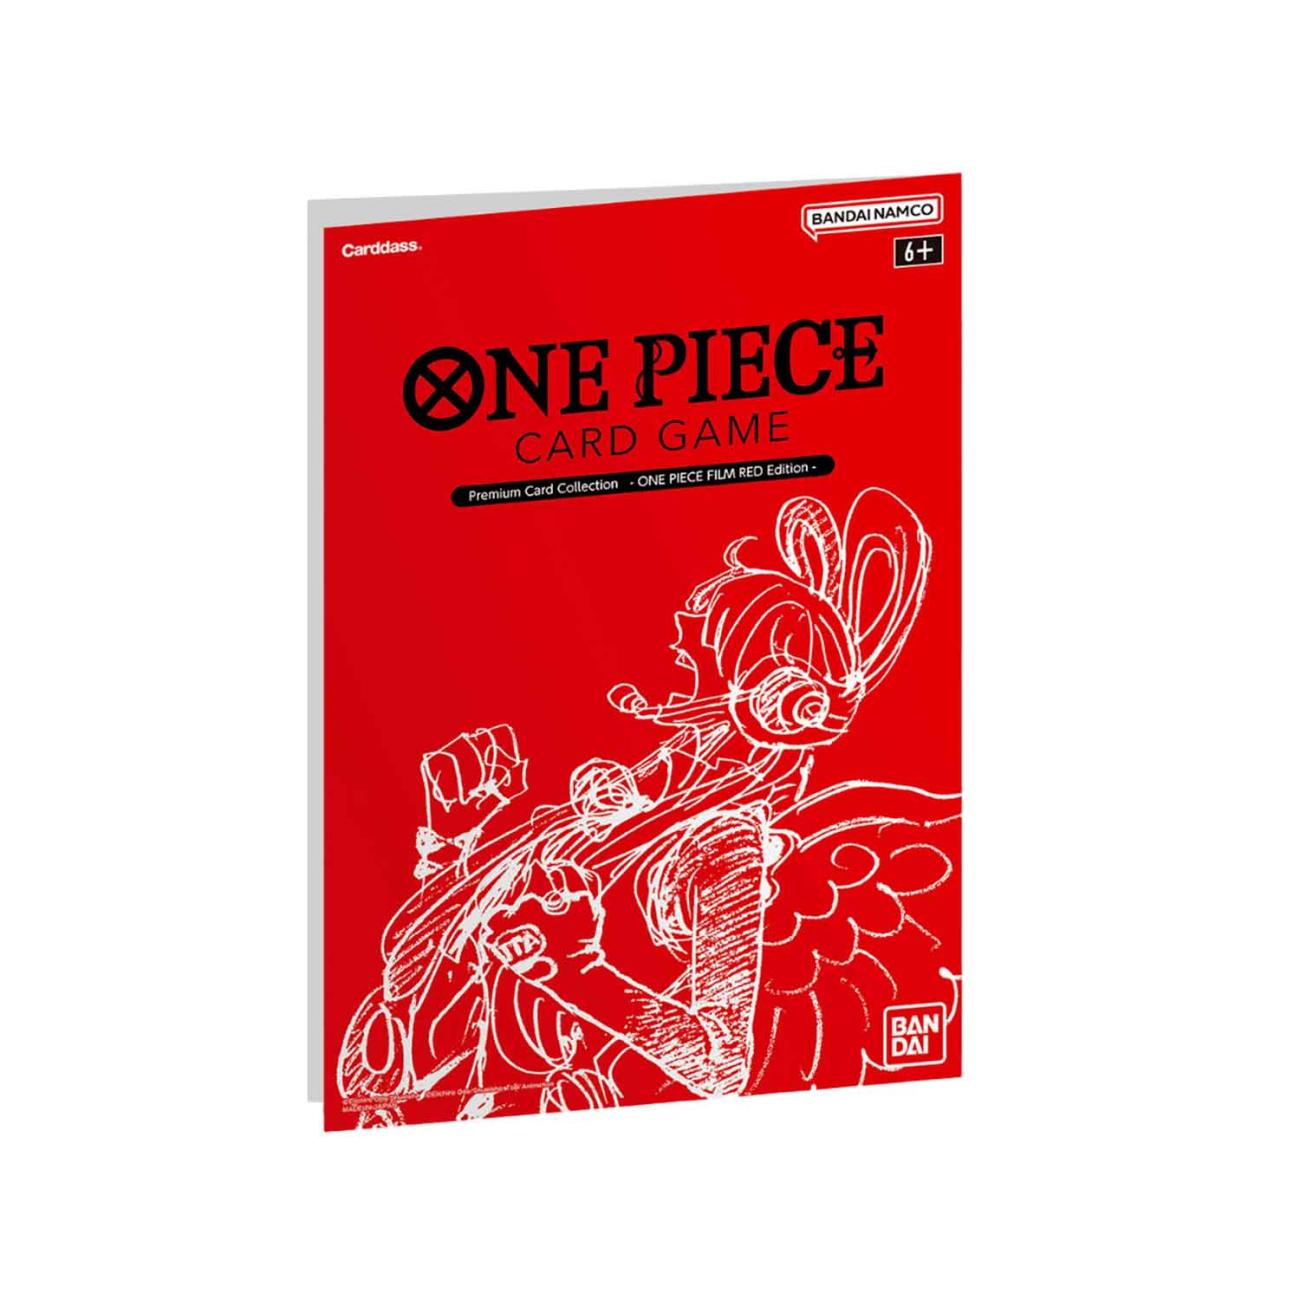 One Piece Film Red Edition Premium Card Collection 